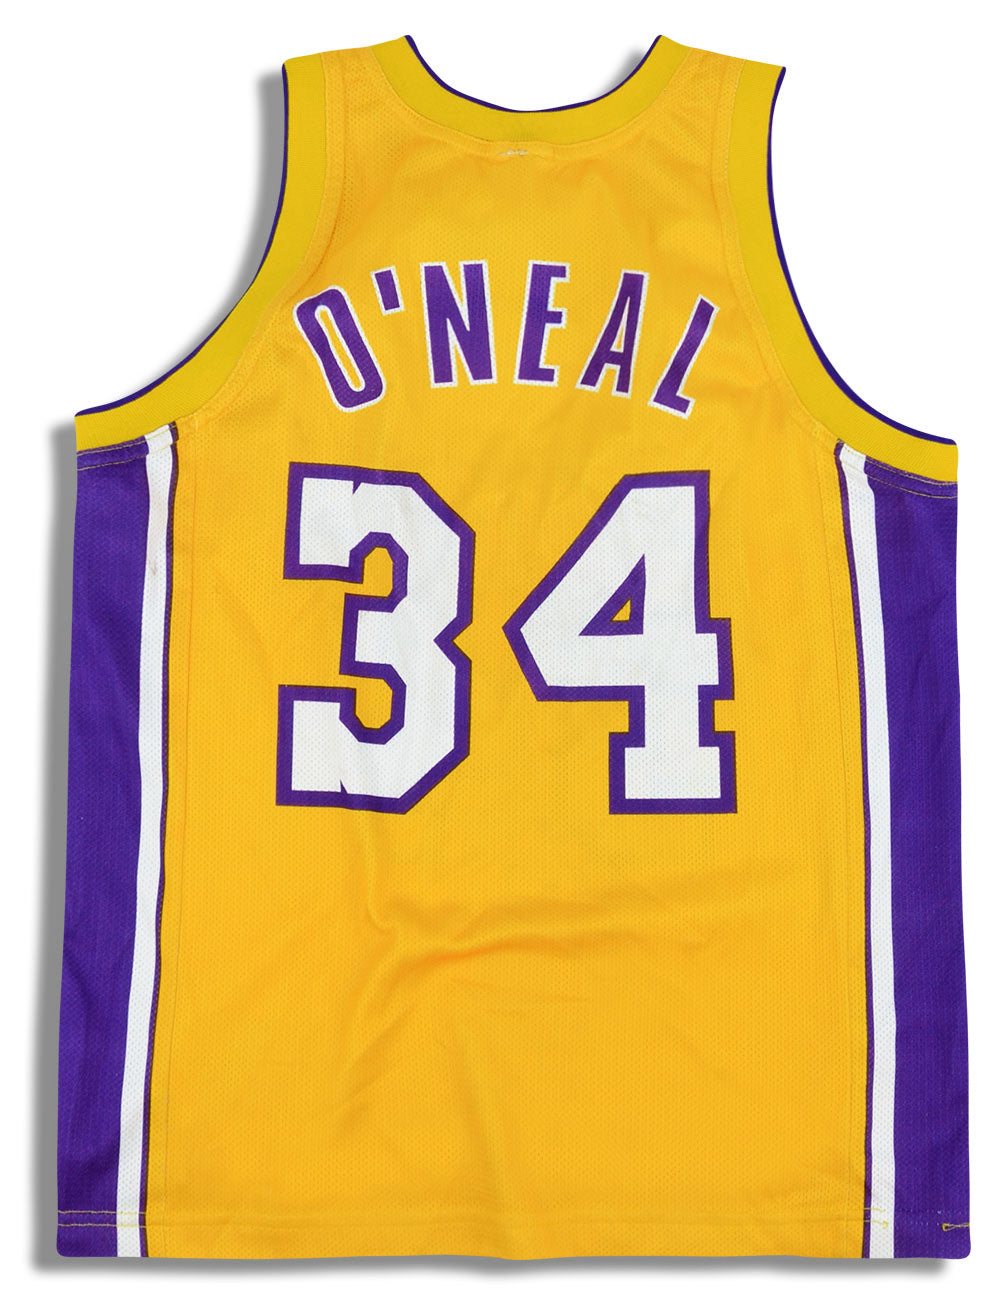 1996-99 LA LAKERS O'NEAL #34 CHAMPION JERSEY (HOME) S - Classic